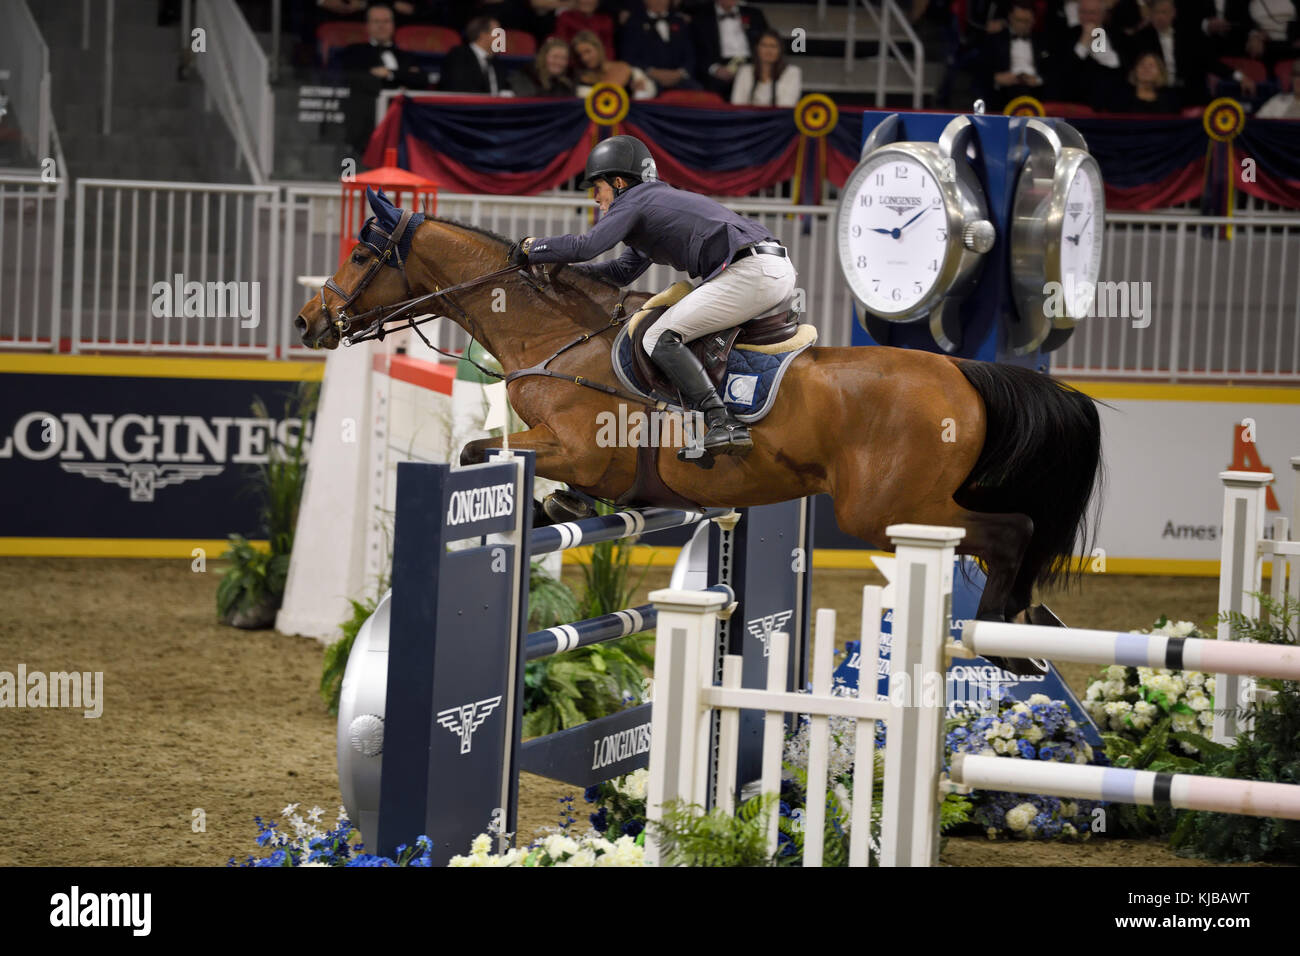 Conor Swail from Ireland riding GK Coco Chanel in the Longines FEI World Cup Show Jumping competition at the Royal Horse Show Toronto Stock Photo